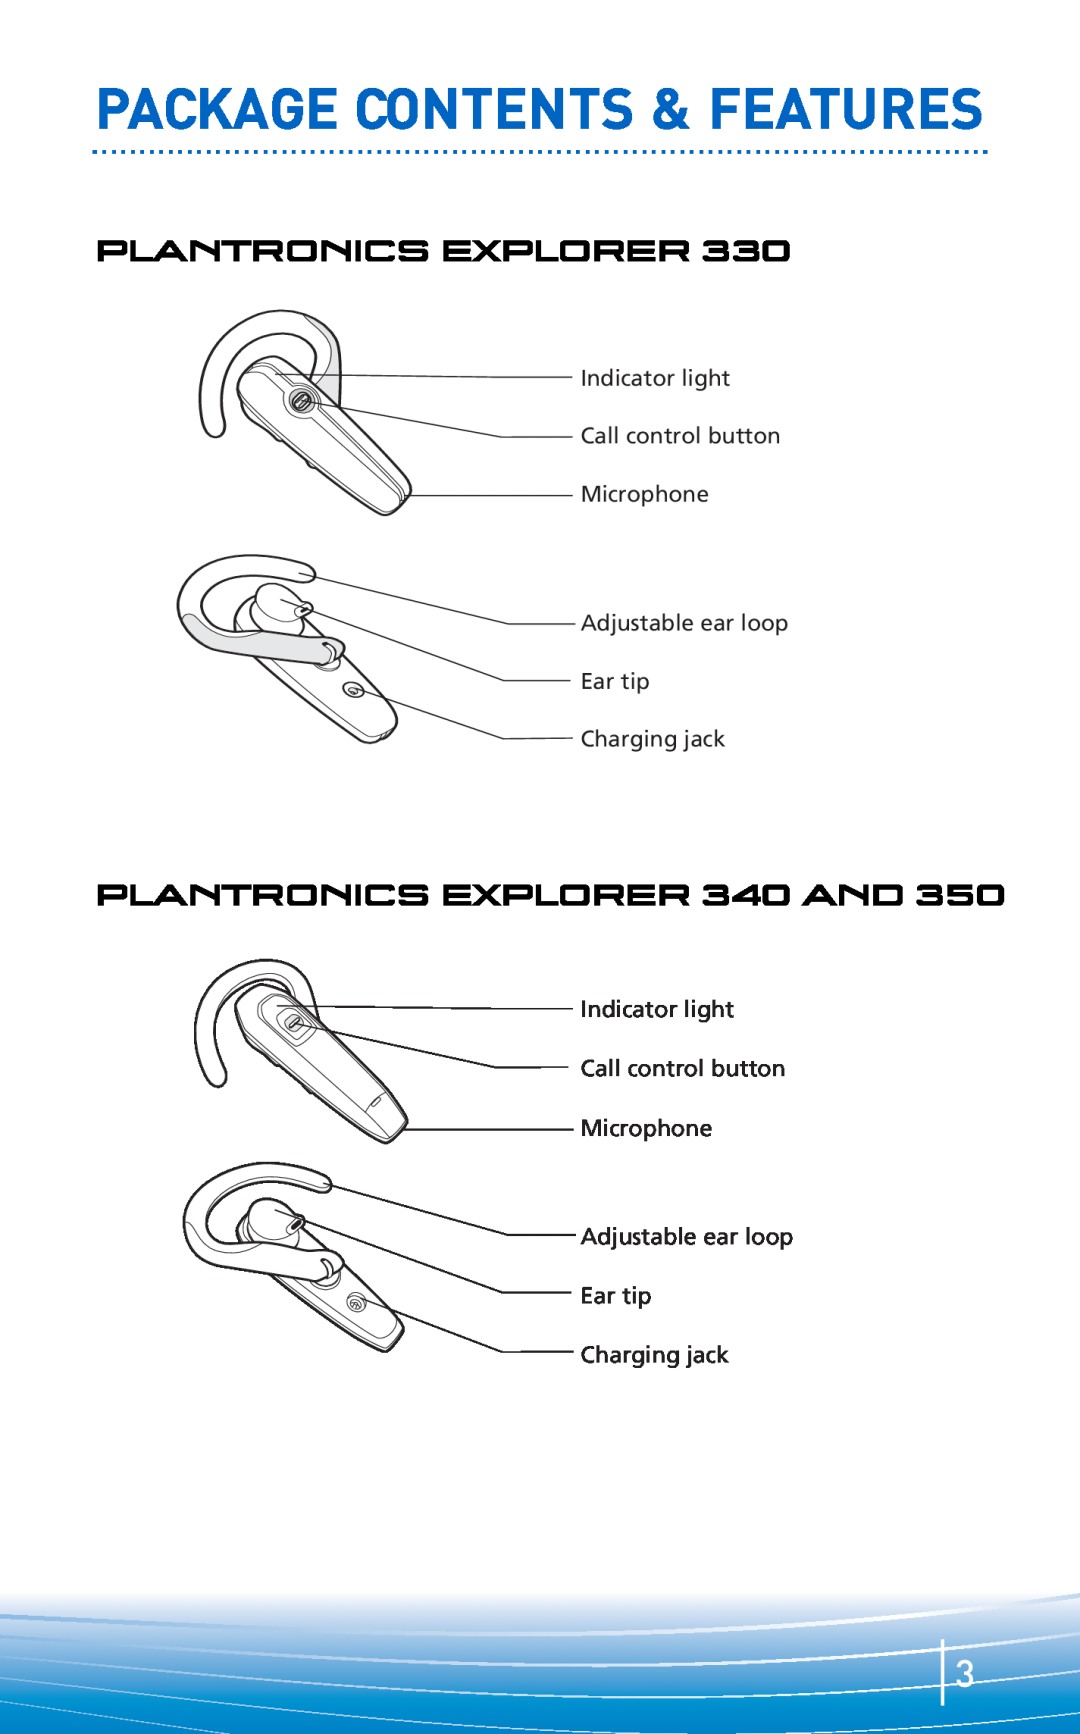 Plantronics 300 Series Package Contents & Features, Plantronics Explorer, PLANTRONICS EXPLORER 340 AND, icrophM, Ear tip 